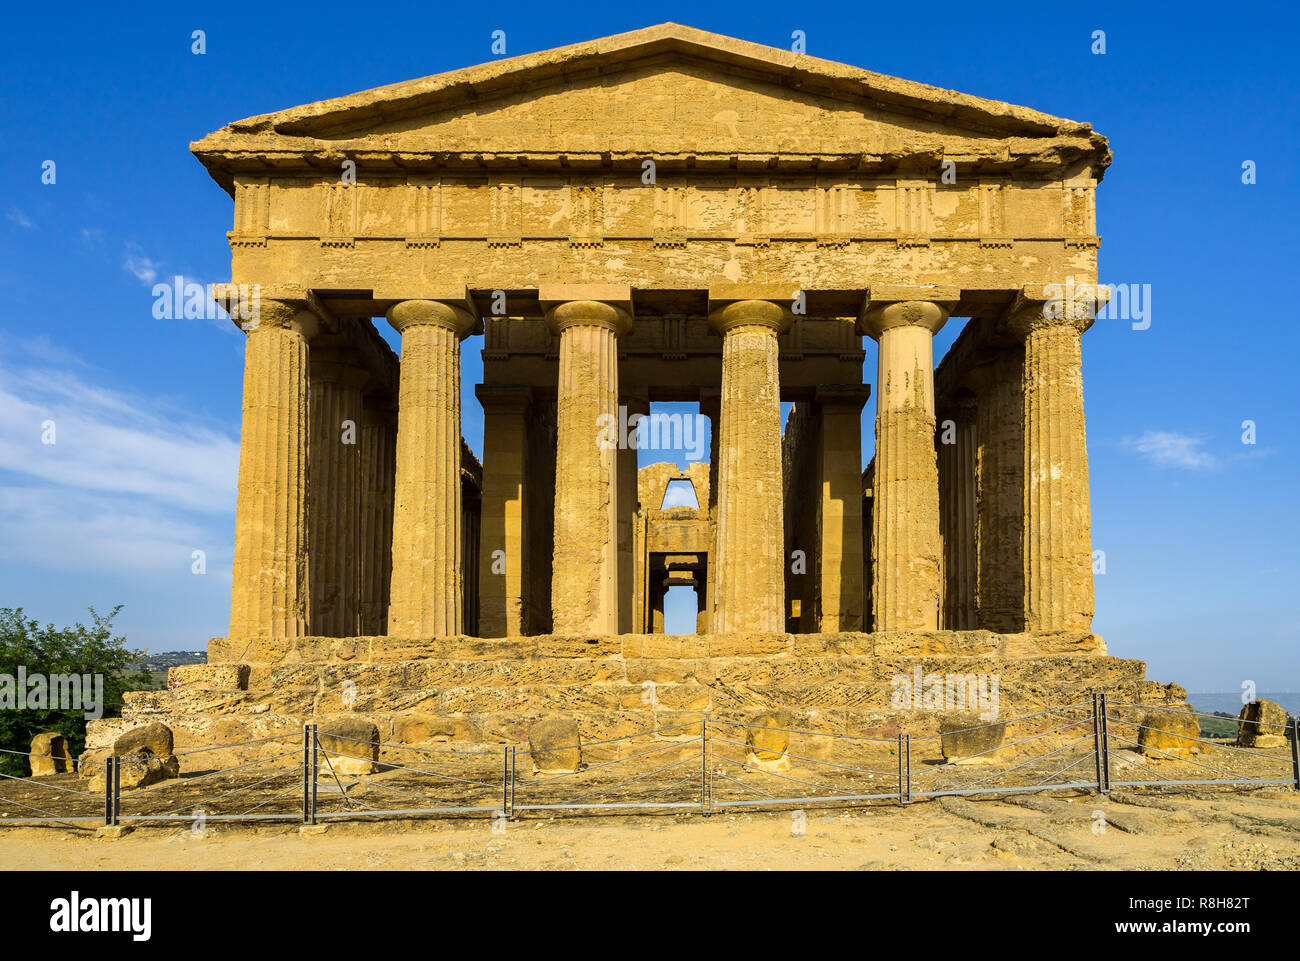 Temple of Concordia with six doric columns facade, Valle dei Templi (Valley of the Temples), Agrigento, Sicily, Italy Stock Photo